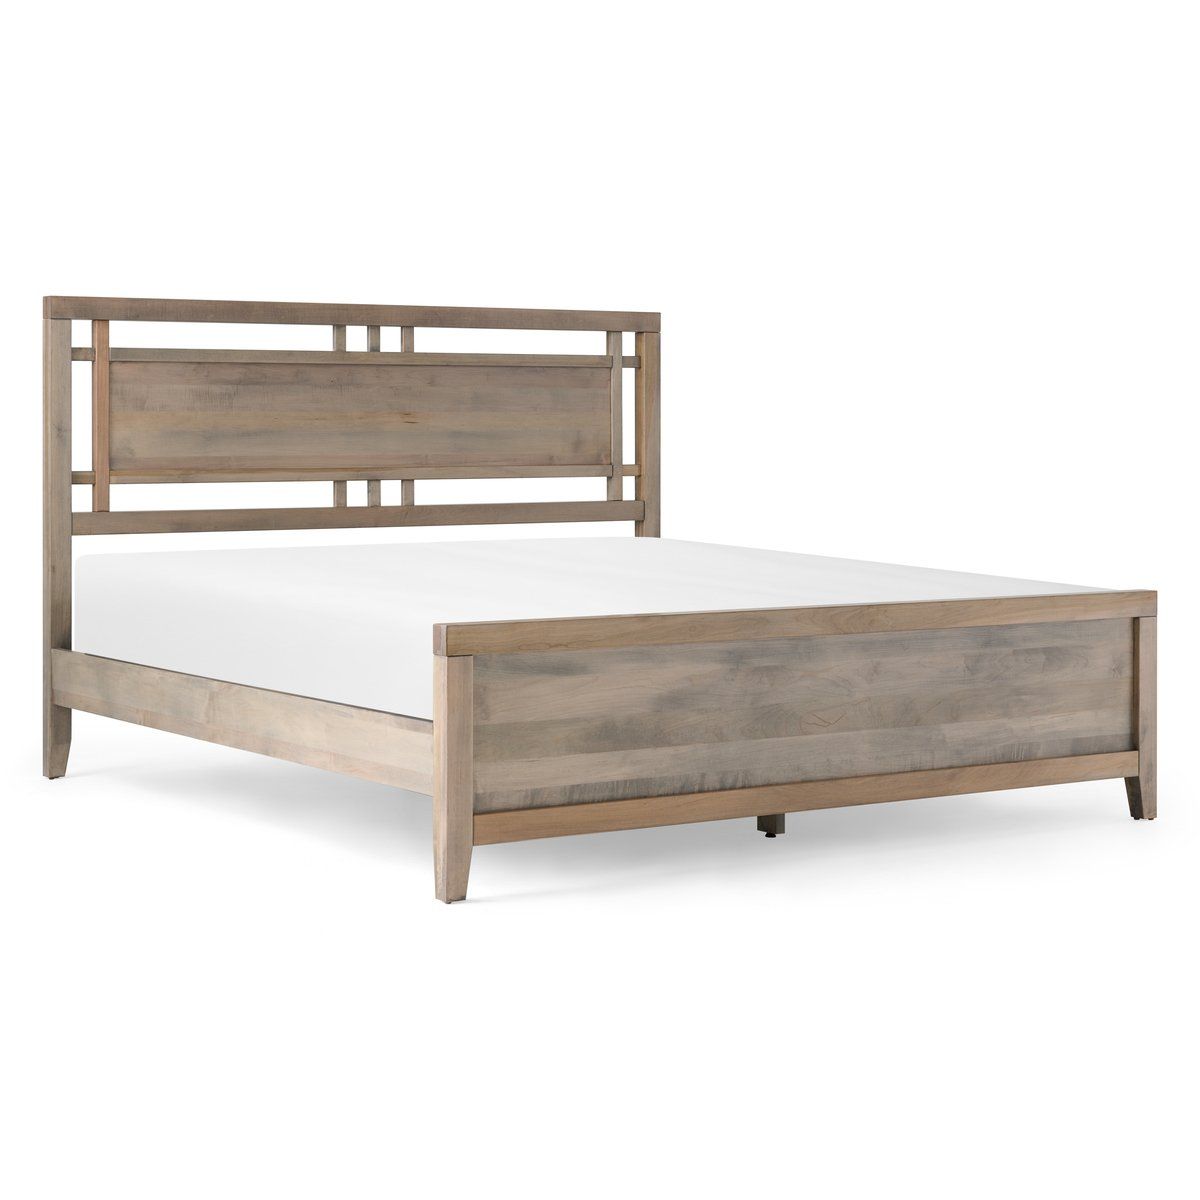 Atwood King Bed